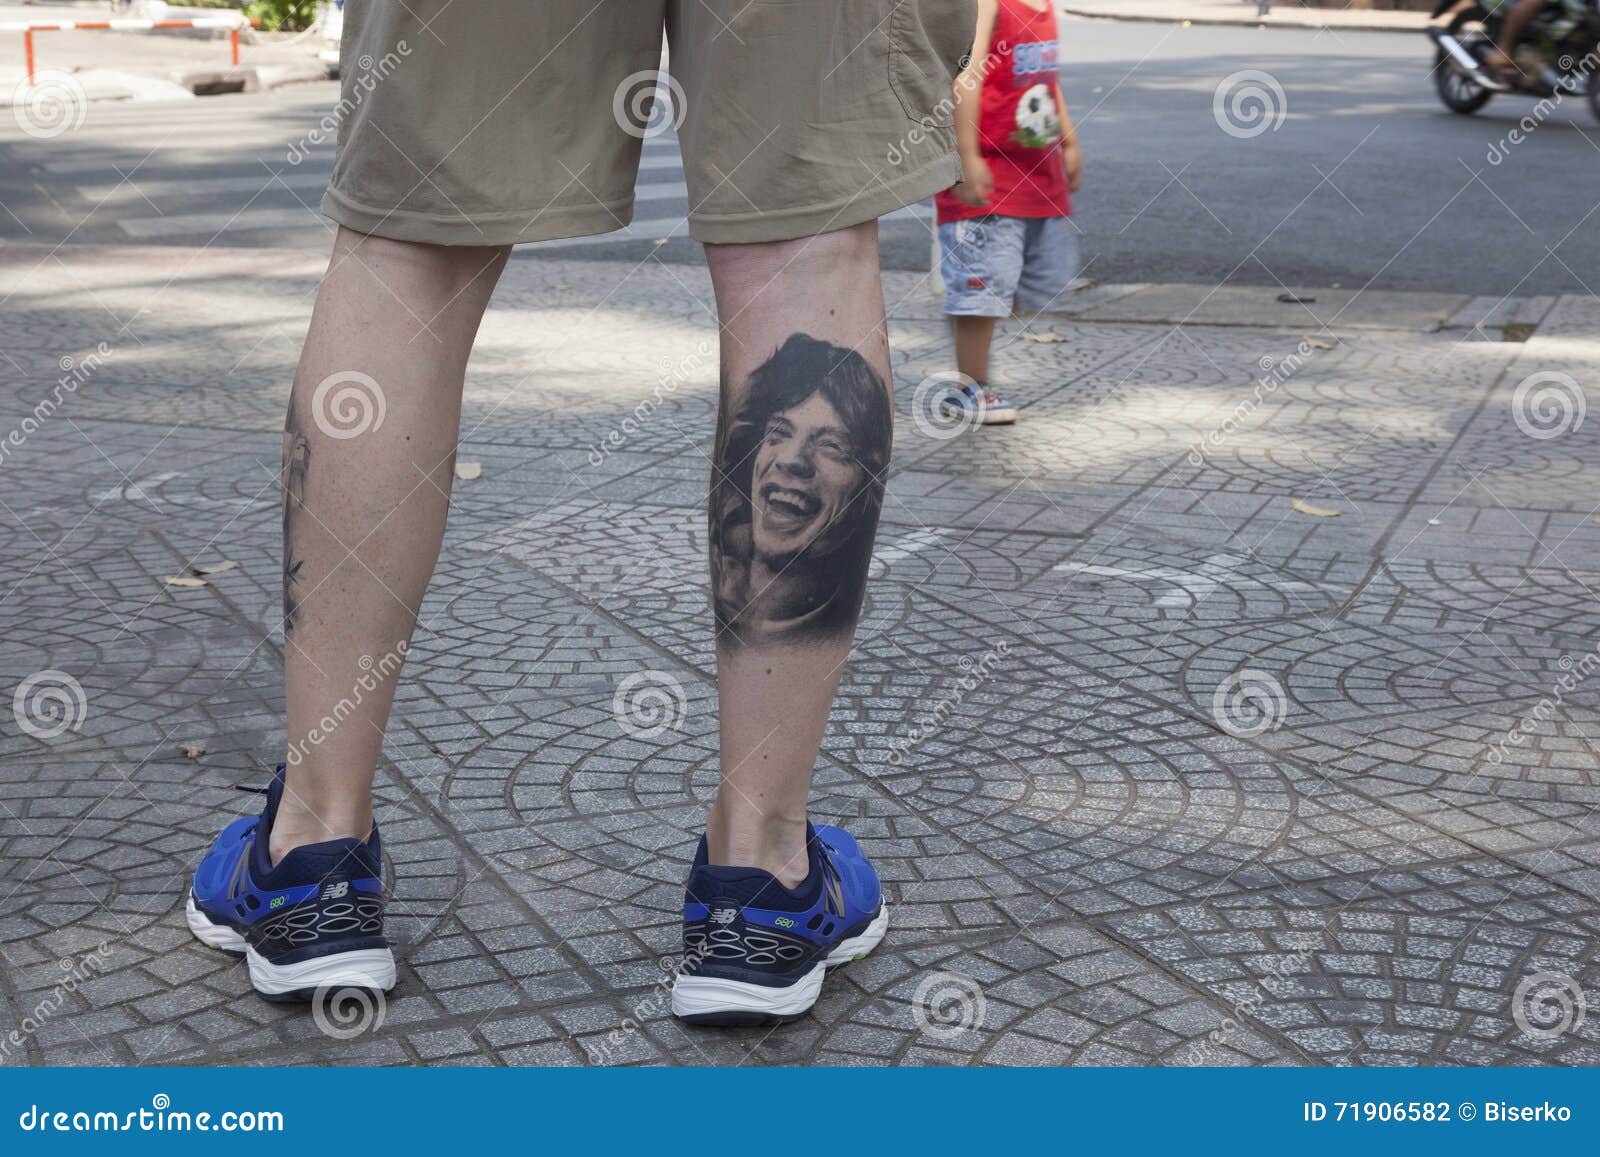 The Rolling Stones on Twitter Tattoo You RT CptHook74 My Stones tattoo  httptcoMADxeSx1  Twitter